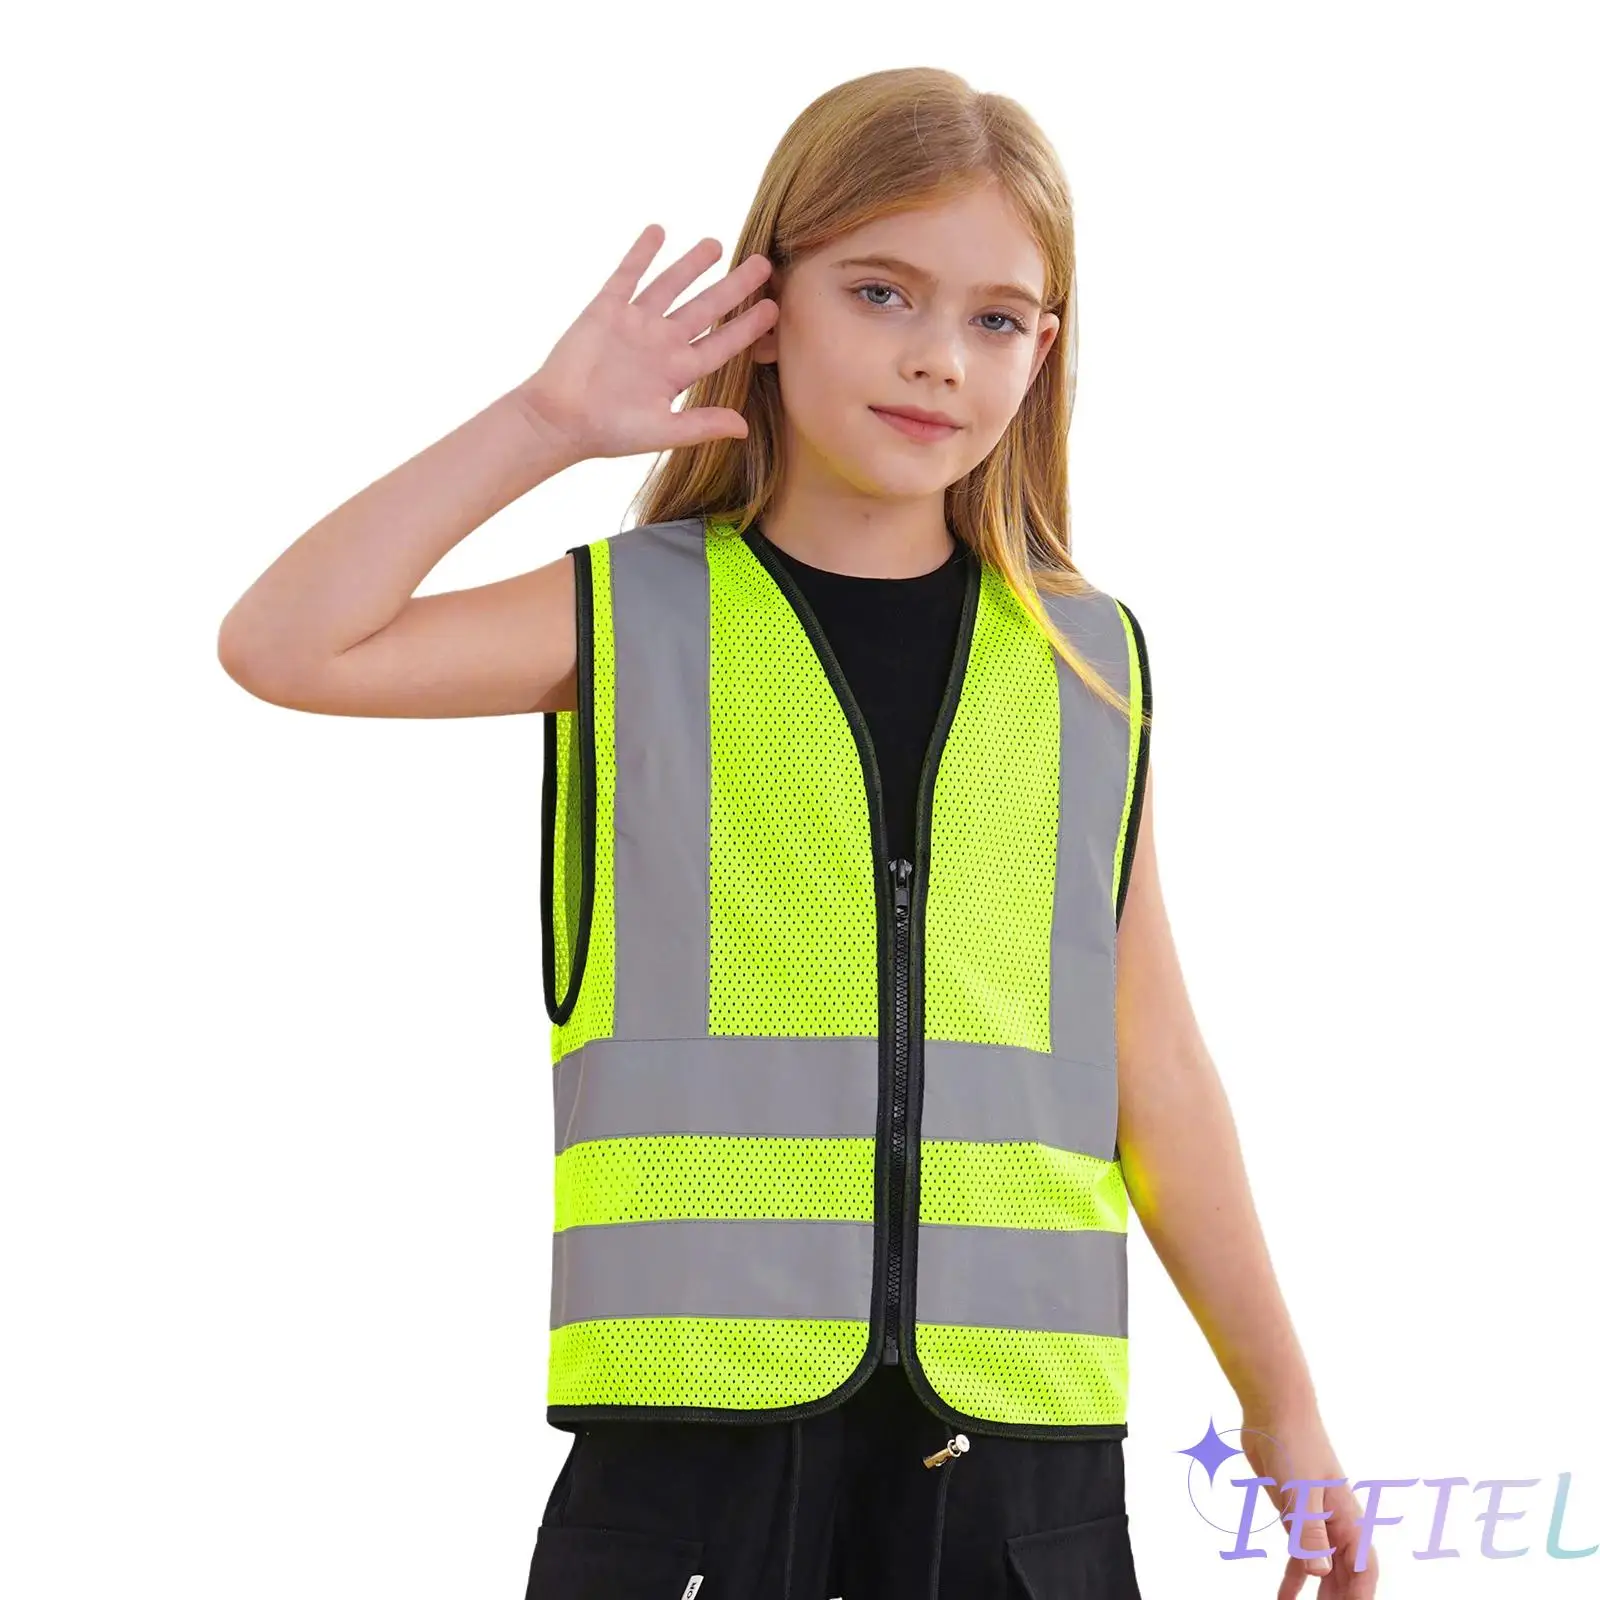 

Unisex Kid Zipper Safety Vest Construction Worker Traffic Vest Hi Visibility Reflective Protective Waistcoat for School Outdoor